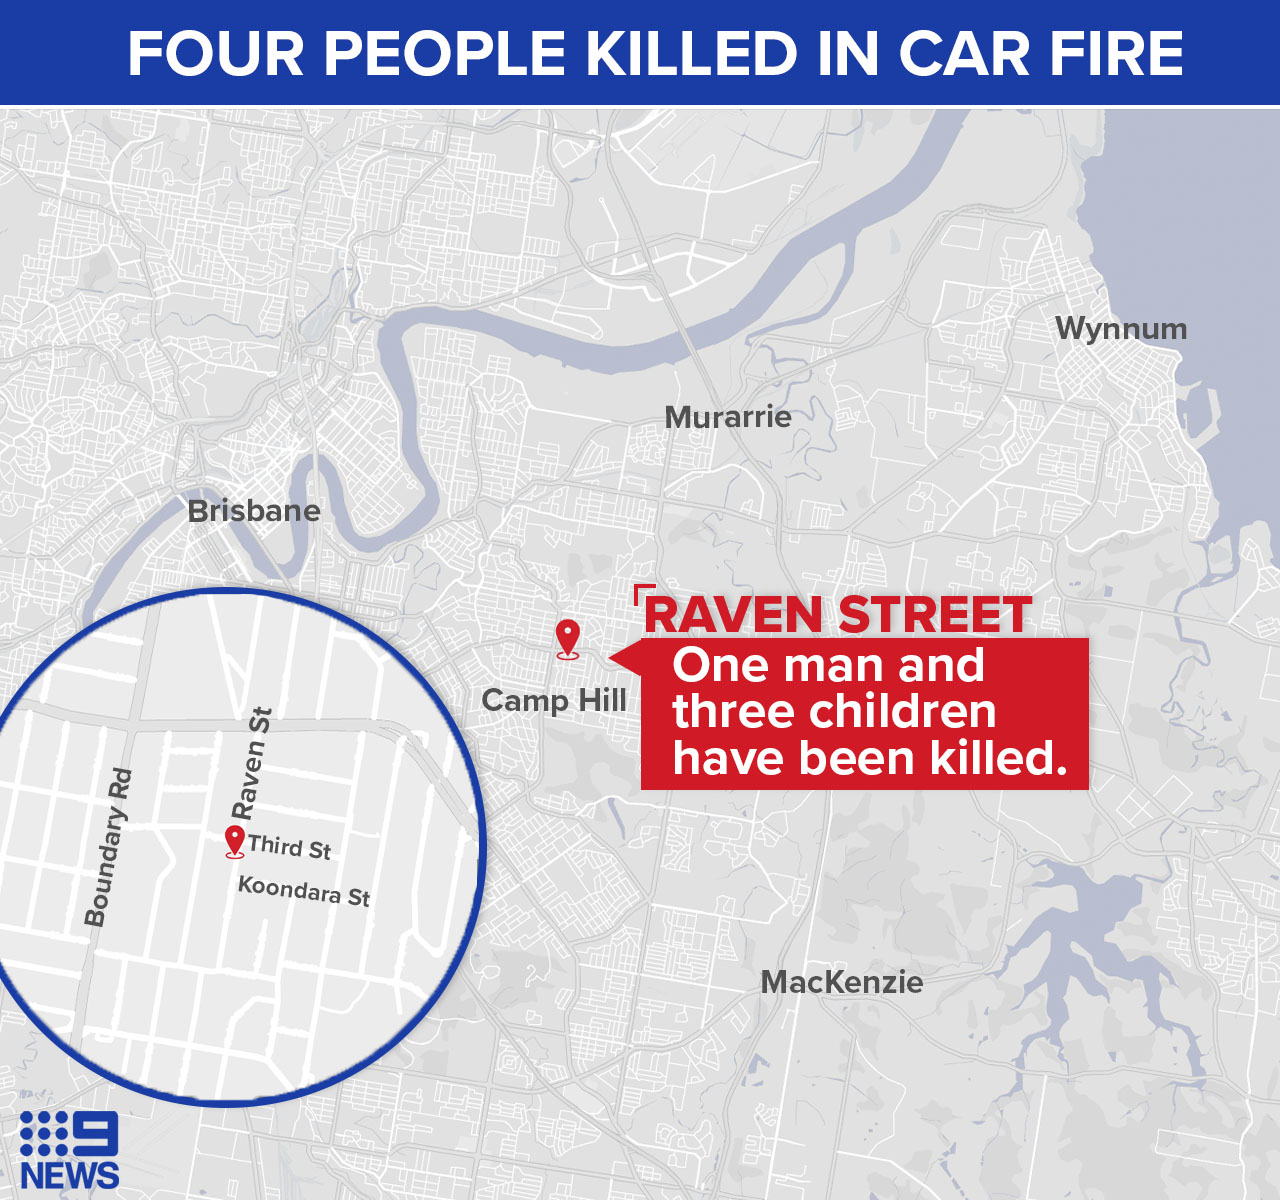 A map of Brisbane showing the location of the car on fire in Camp Hill